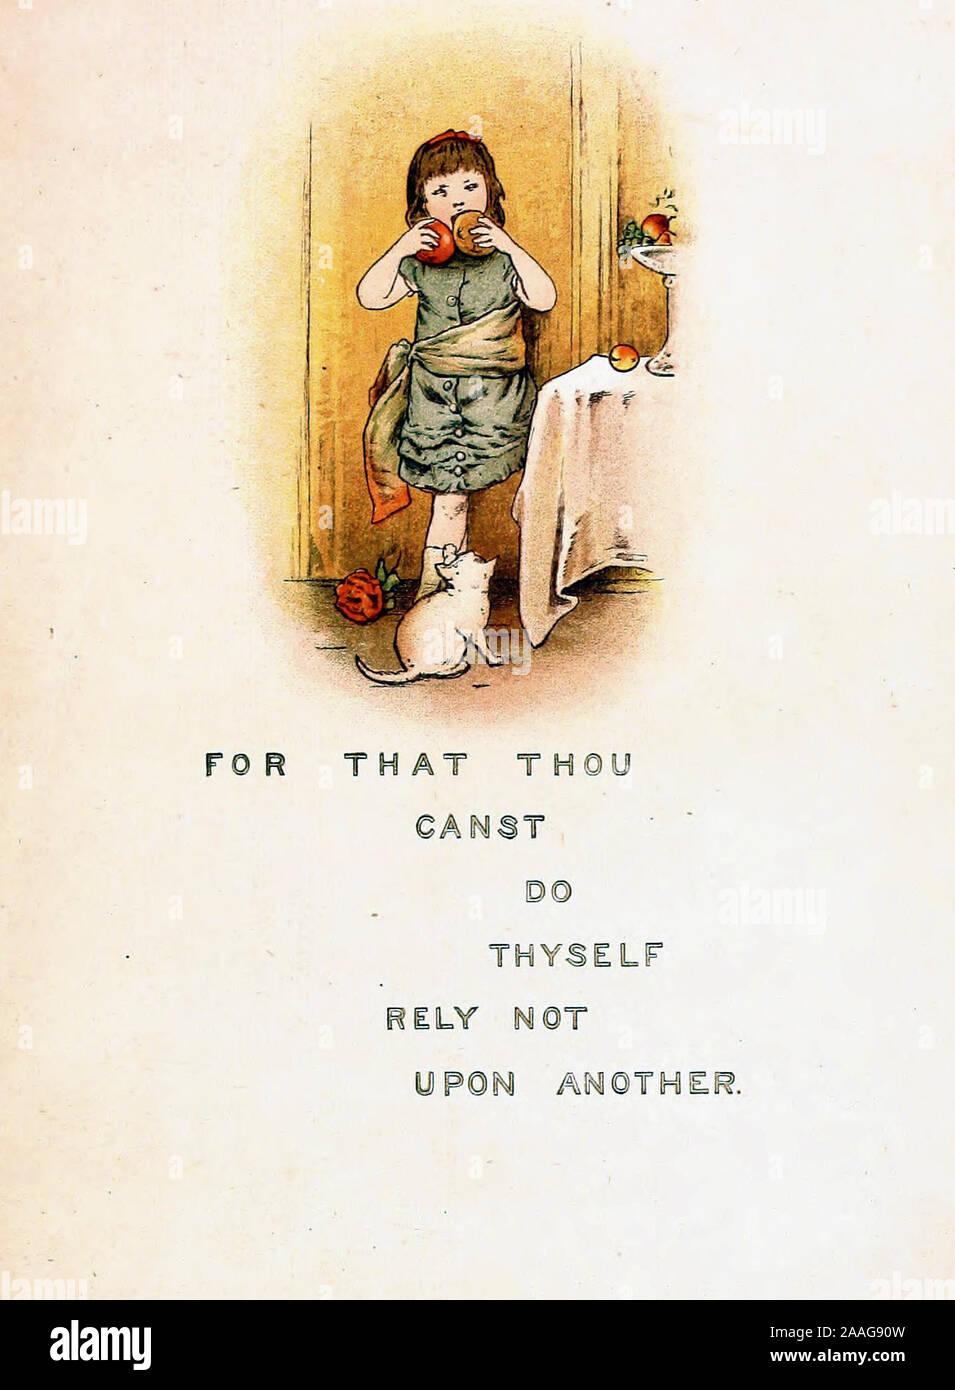 For that thou canst do thyself, rely not upon another - A Vintage Illustration of an Old Proverb Stock Photo